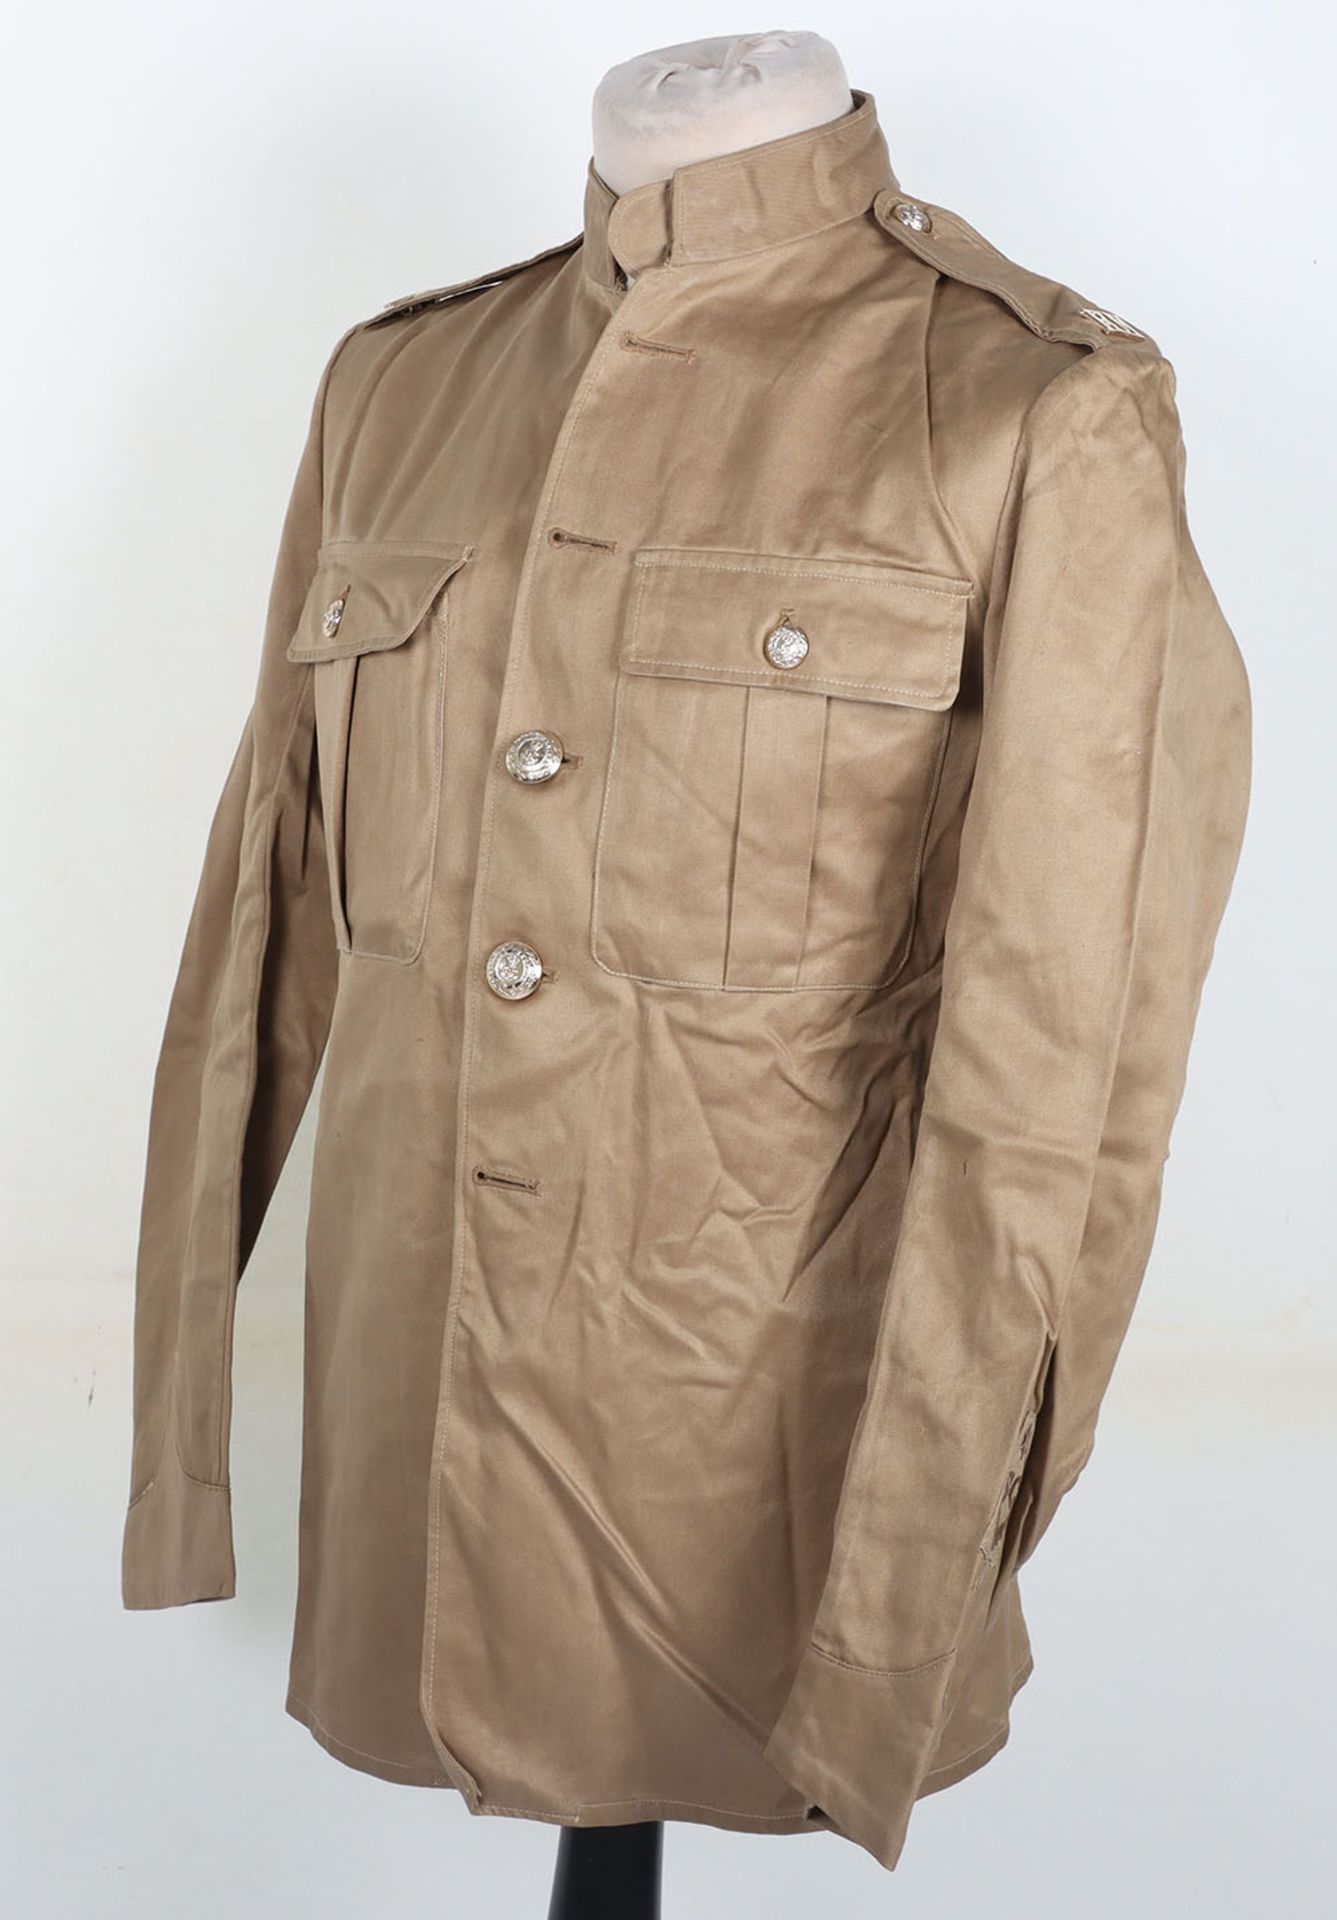 British Post War Royal Marines KD Tunic and Trousers Worn by Swimmer Canoeist T D Hughes During his - Image 7 of 15